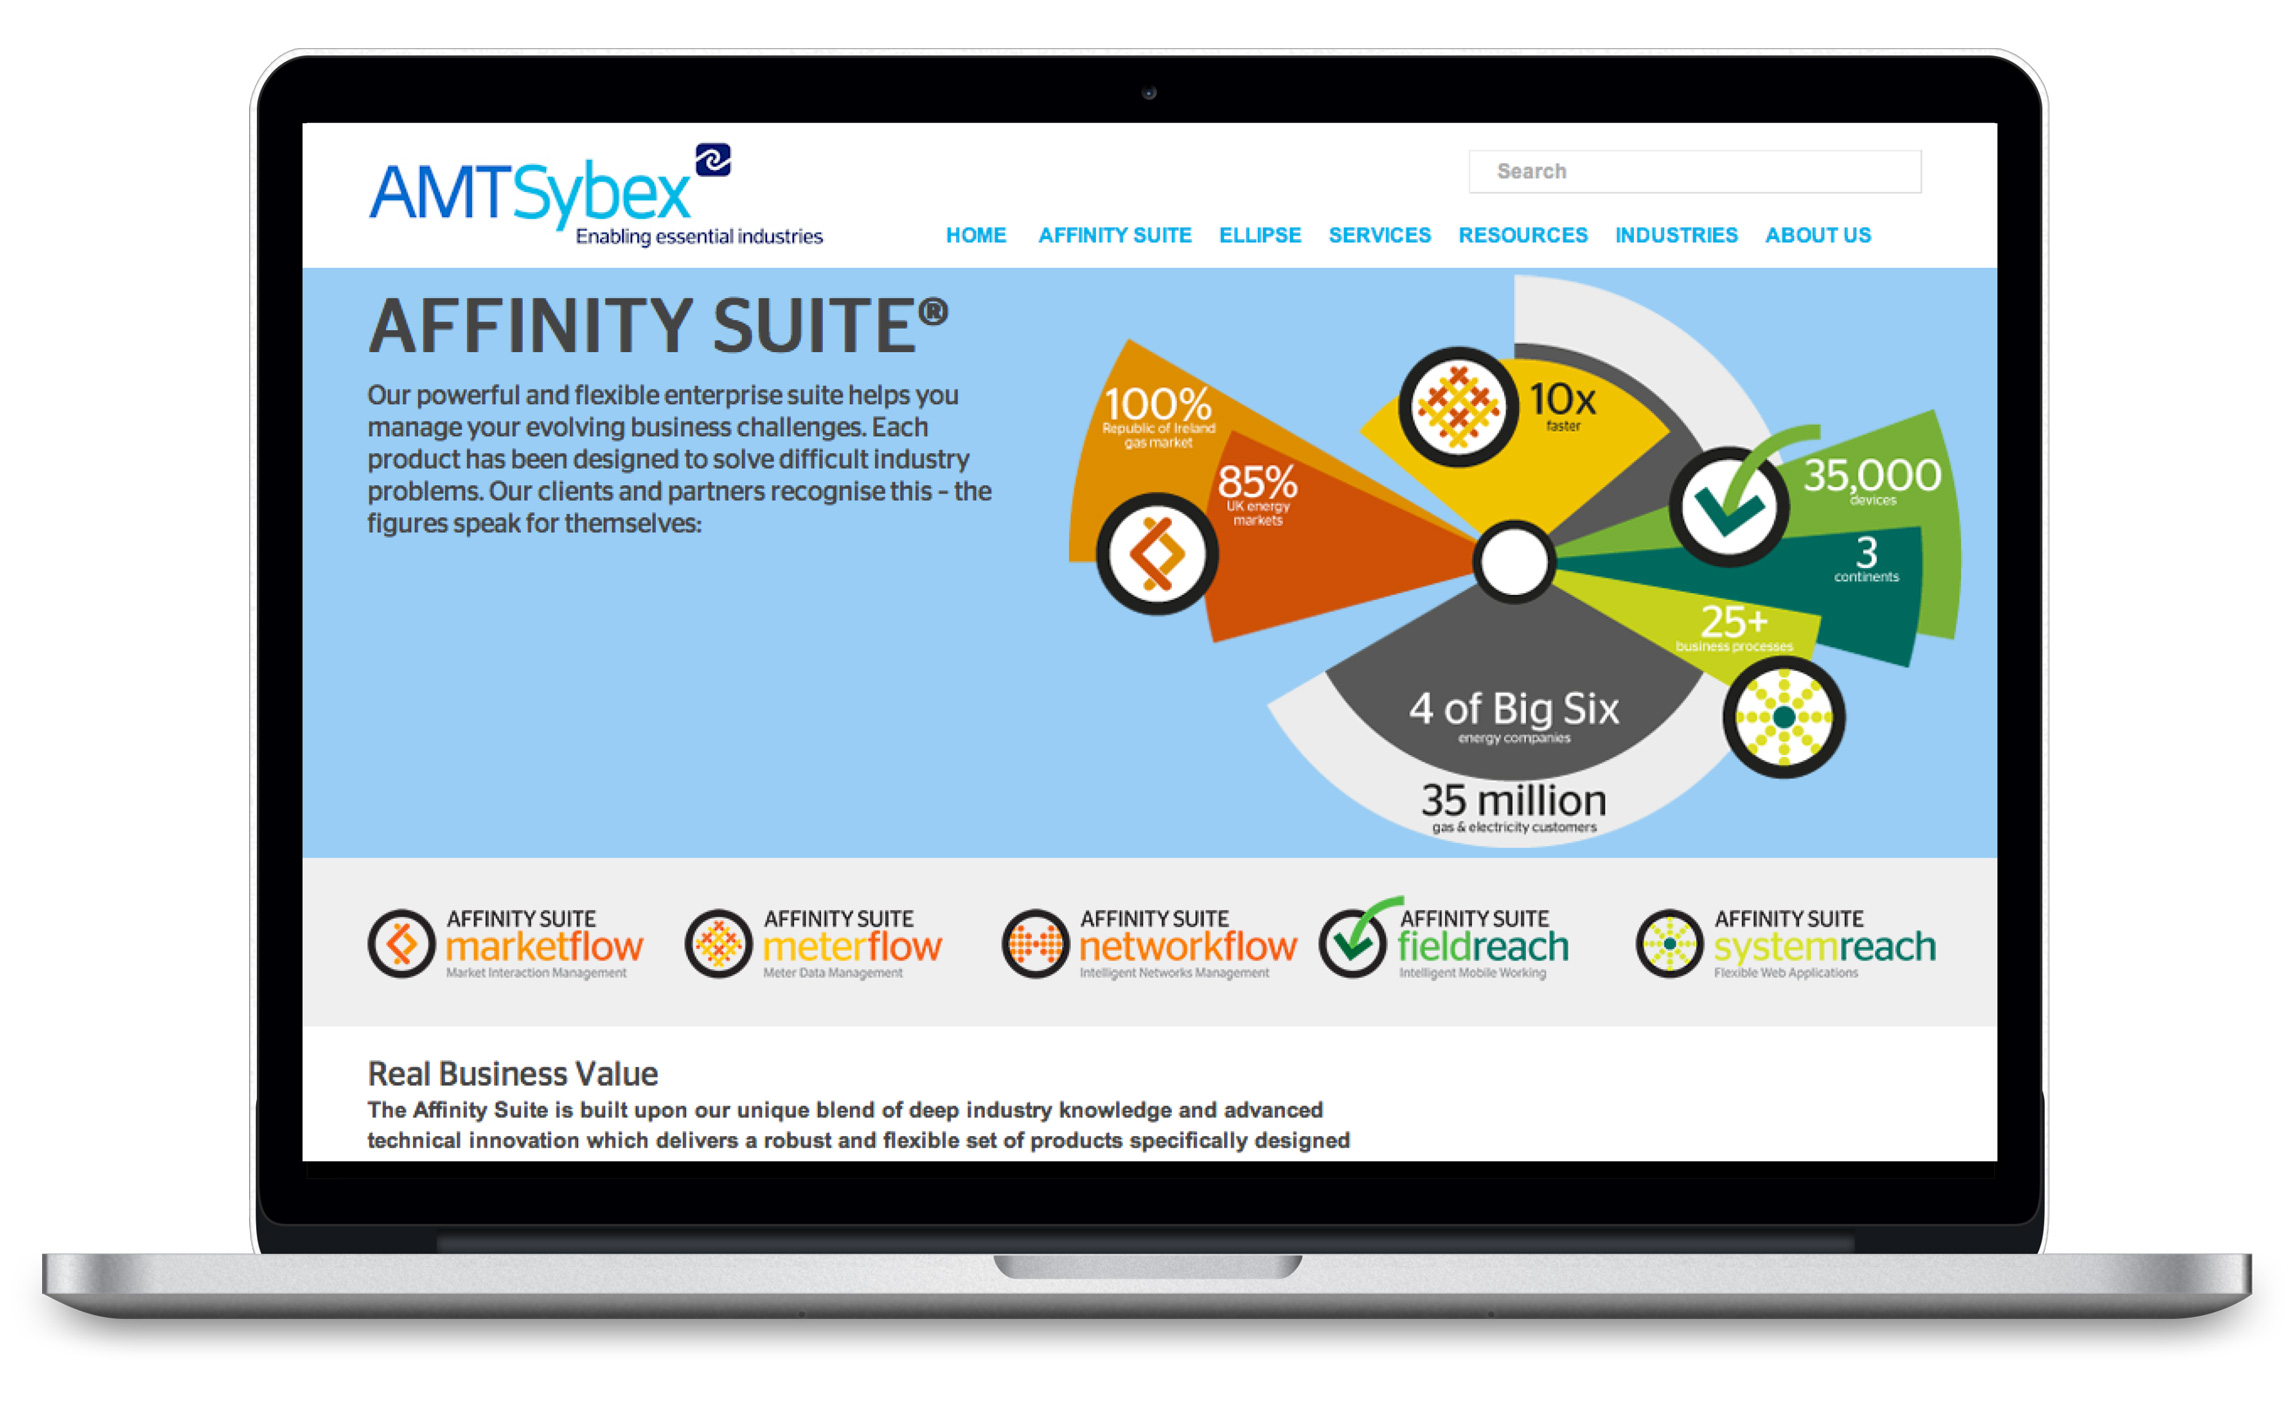 amt sybex technology rebrand product affinity suite website